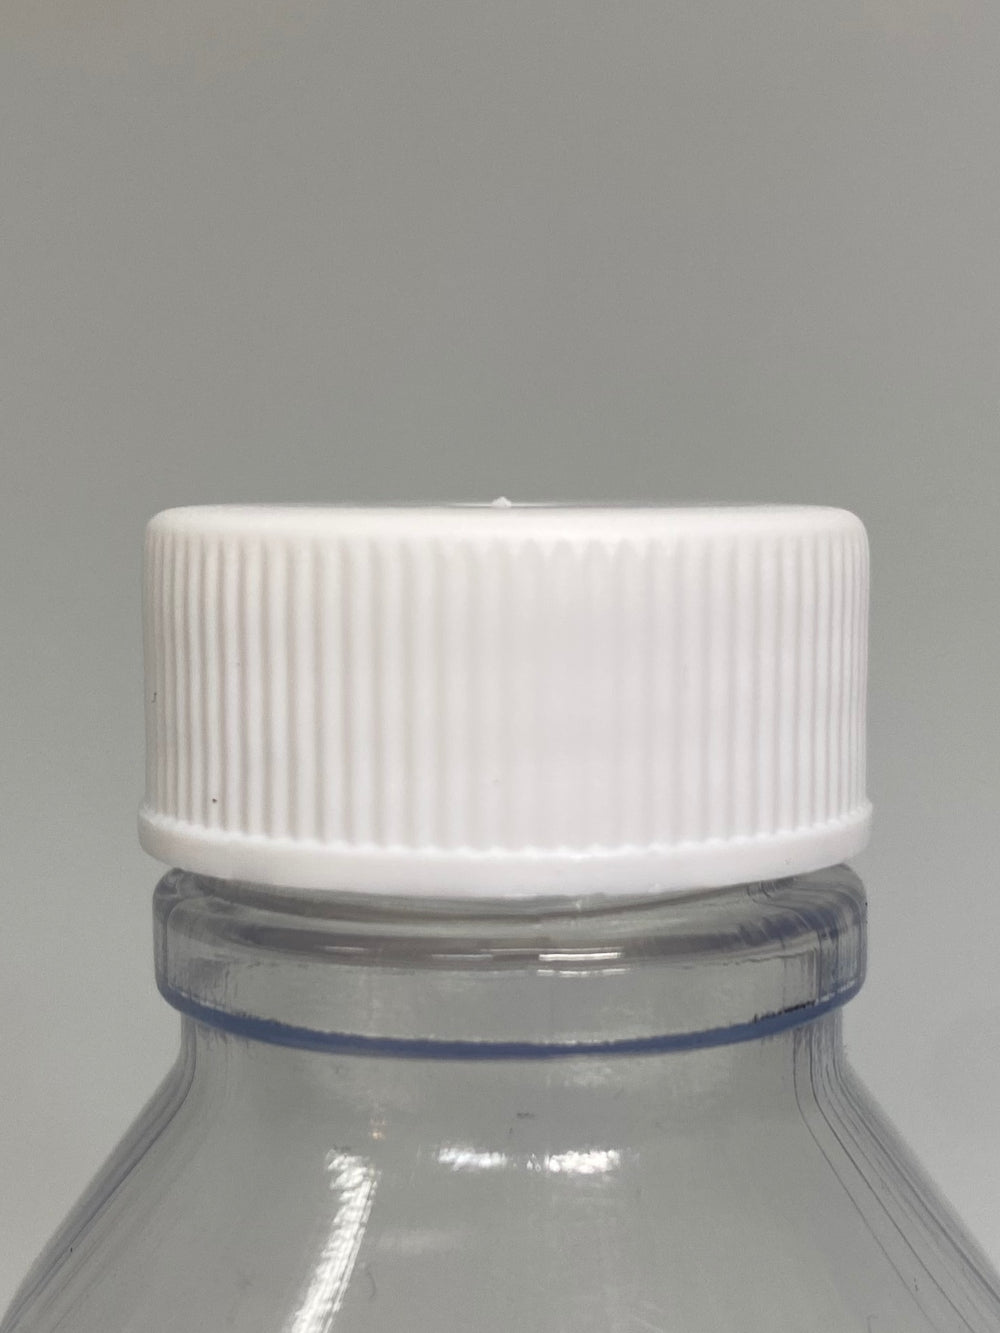 100ml Medical Round Screw Top PVC Bottle - (Pack of 100 units)